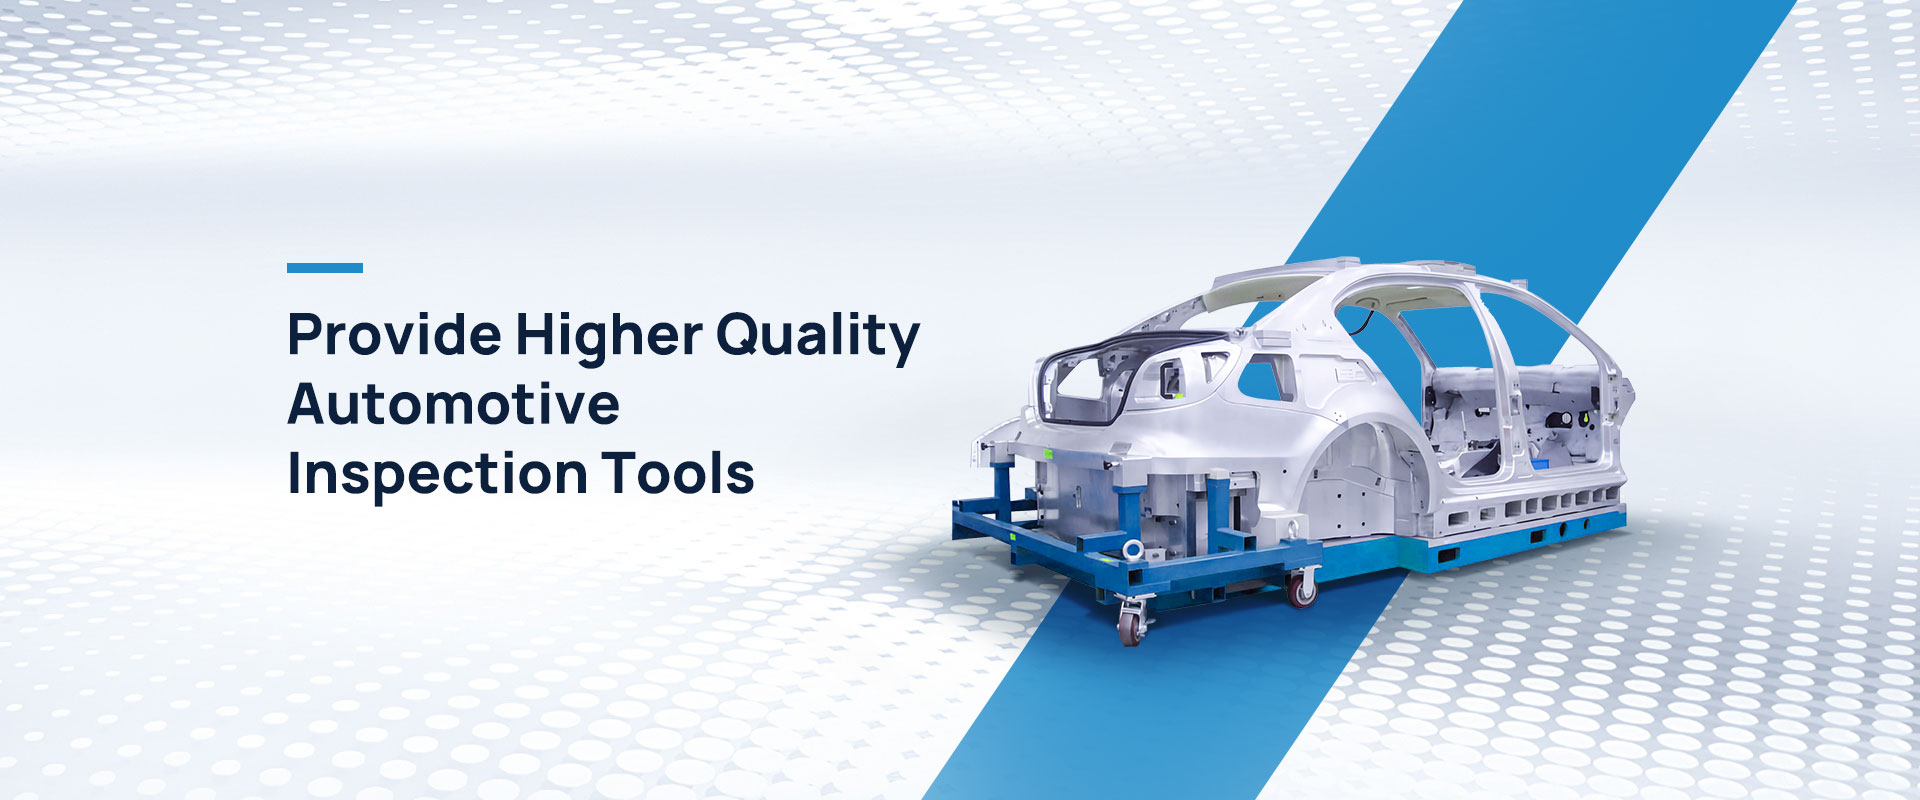 Provide Higher Quality Automotive Inspection Tools